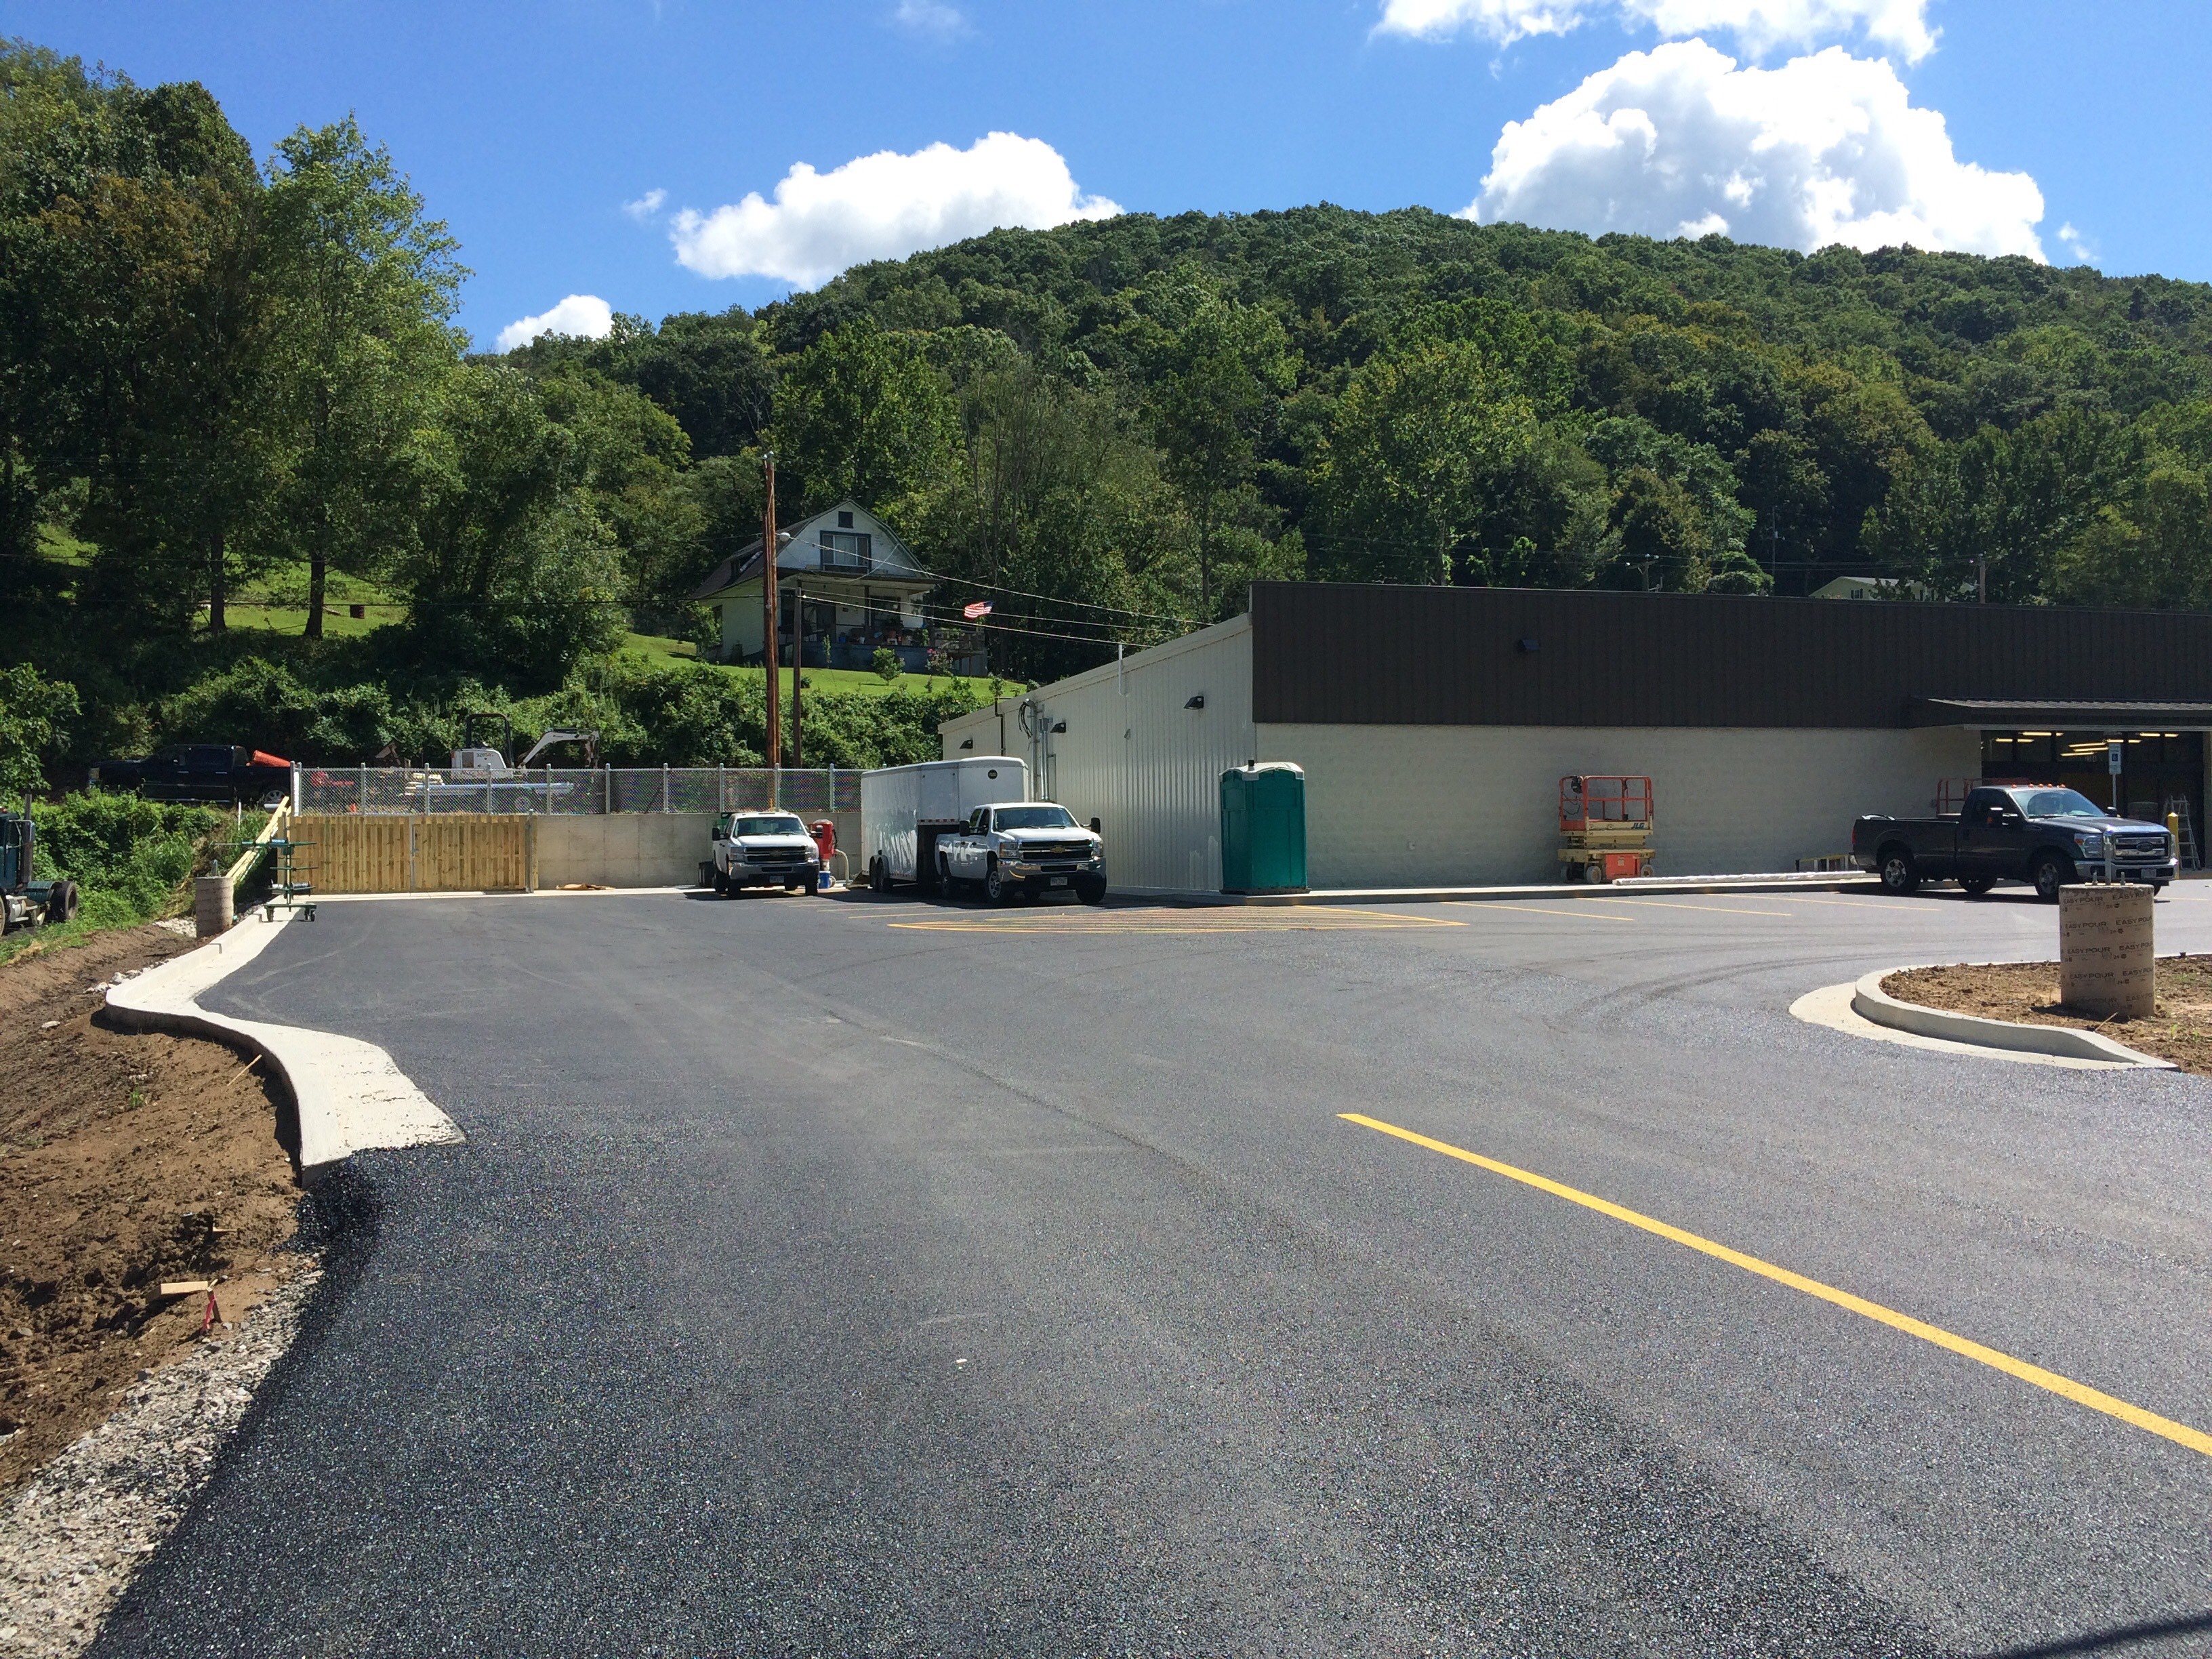 outside 2, dollar general, charleston wv,, shopping, supermarket, retail, commercial, commercial construction